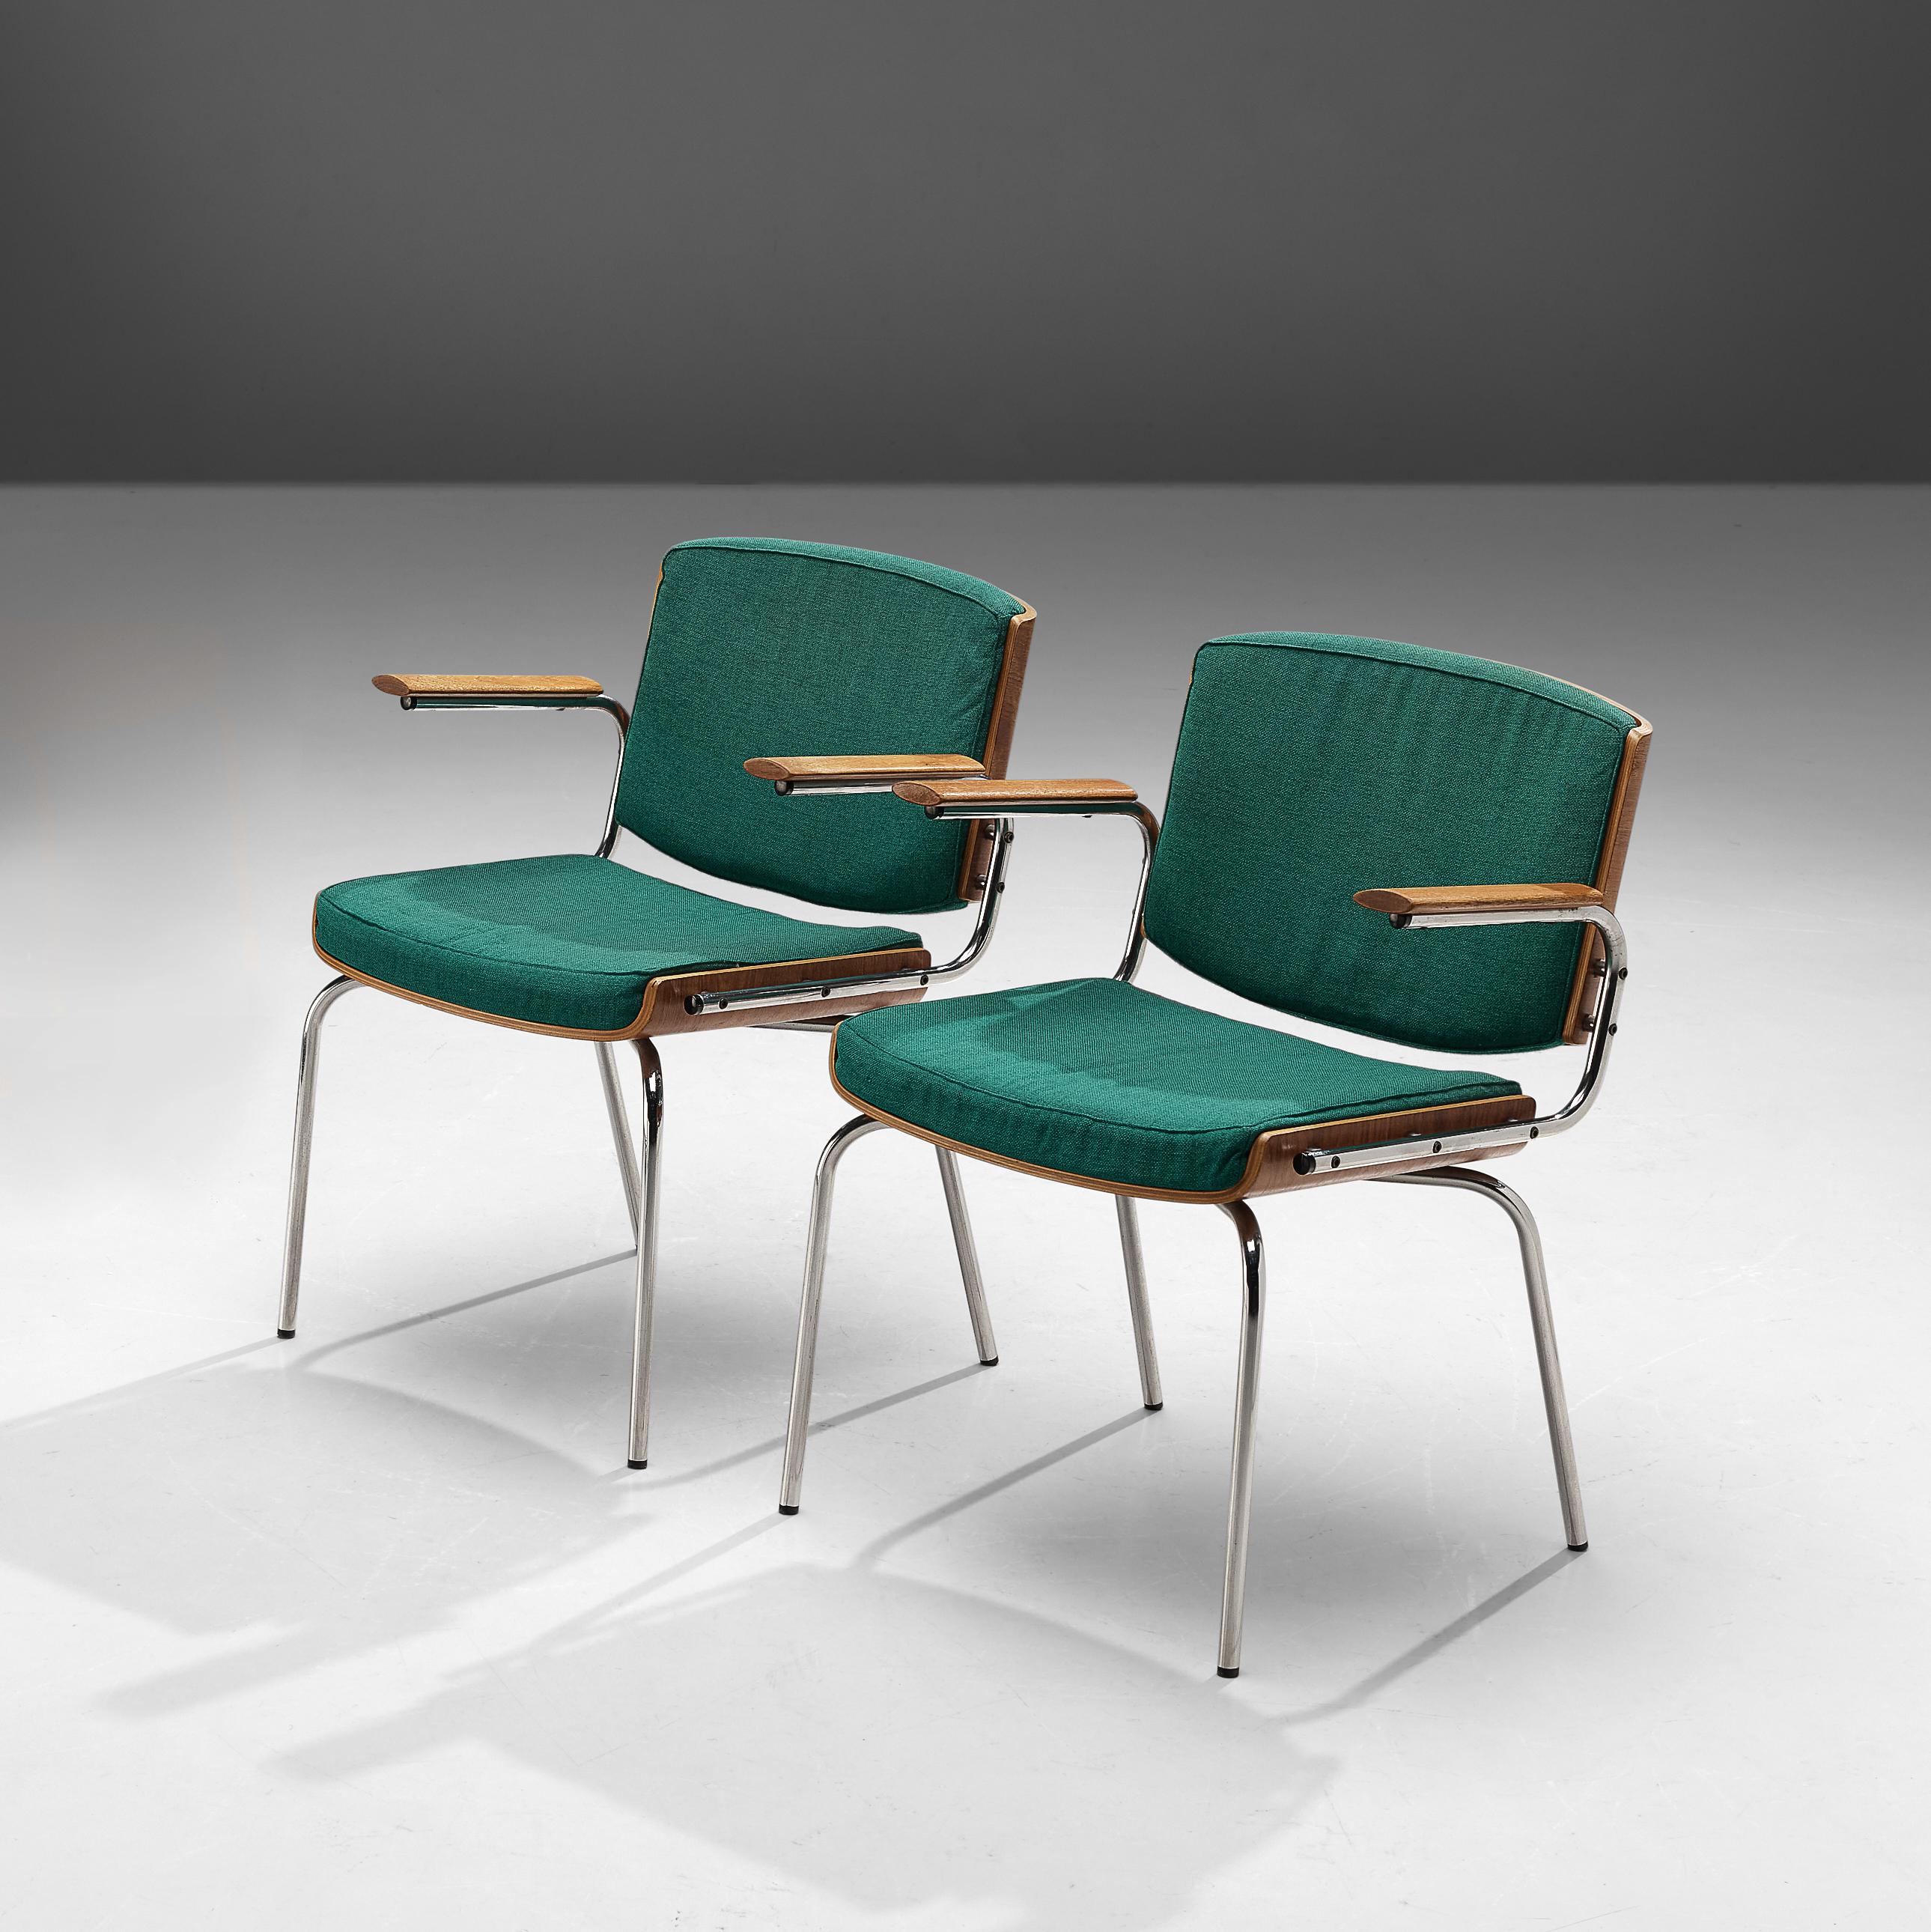 Armchairs, teak, fabric, metal, Denmark, 1970s

The design features a striking combination of materials and textures. The back of the backrest and frame of the seat are made in wood. The green fabric upholstery combines wonderfully with the wood.